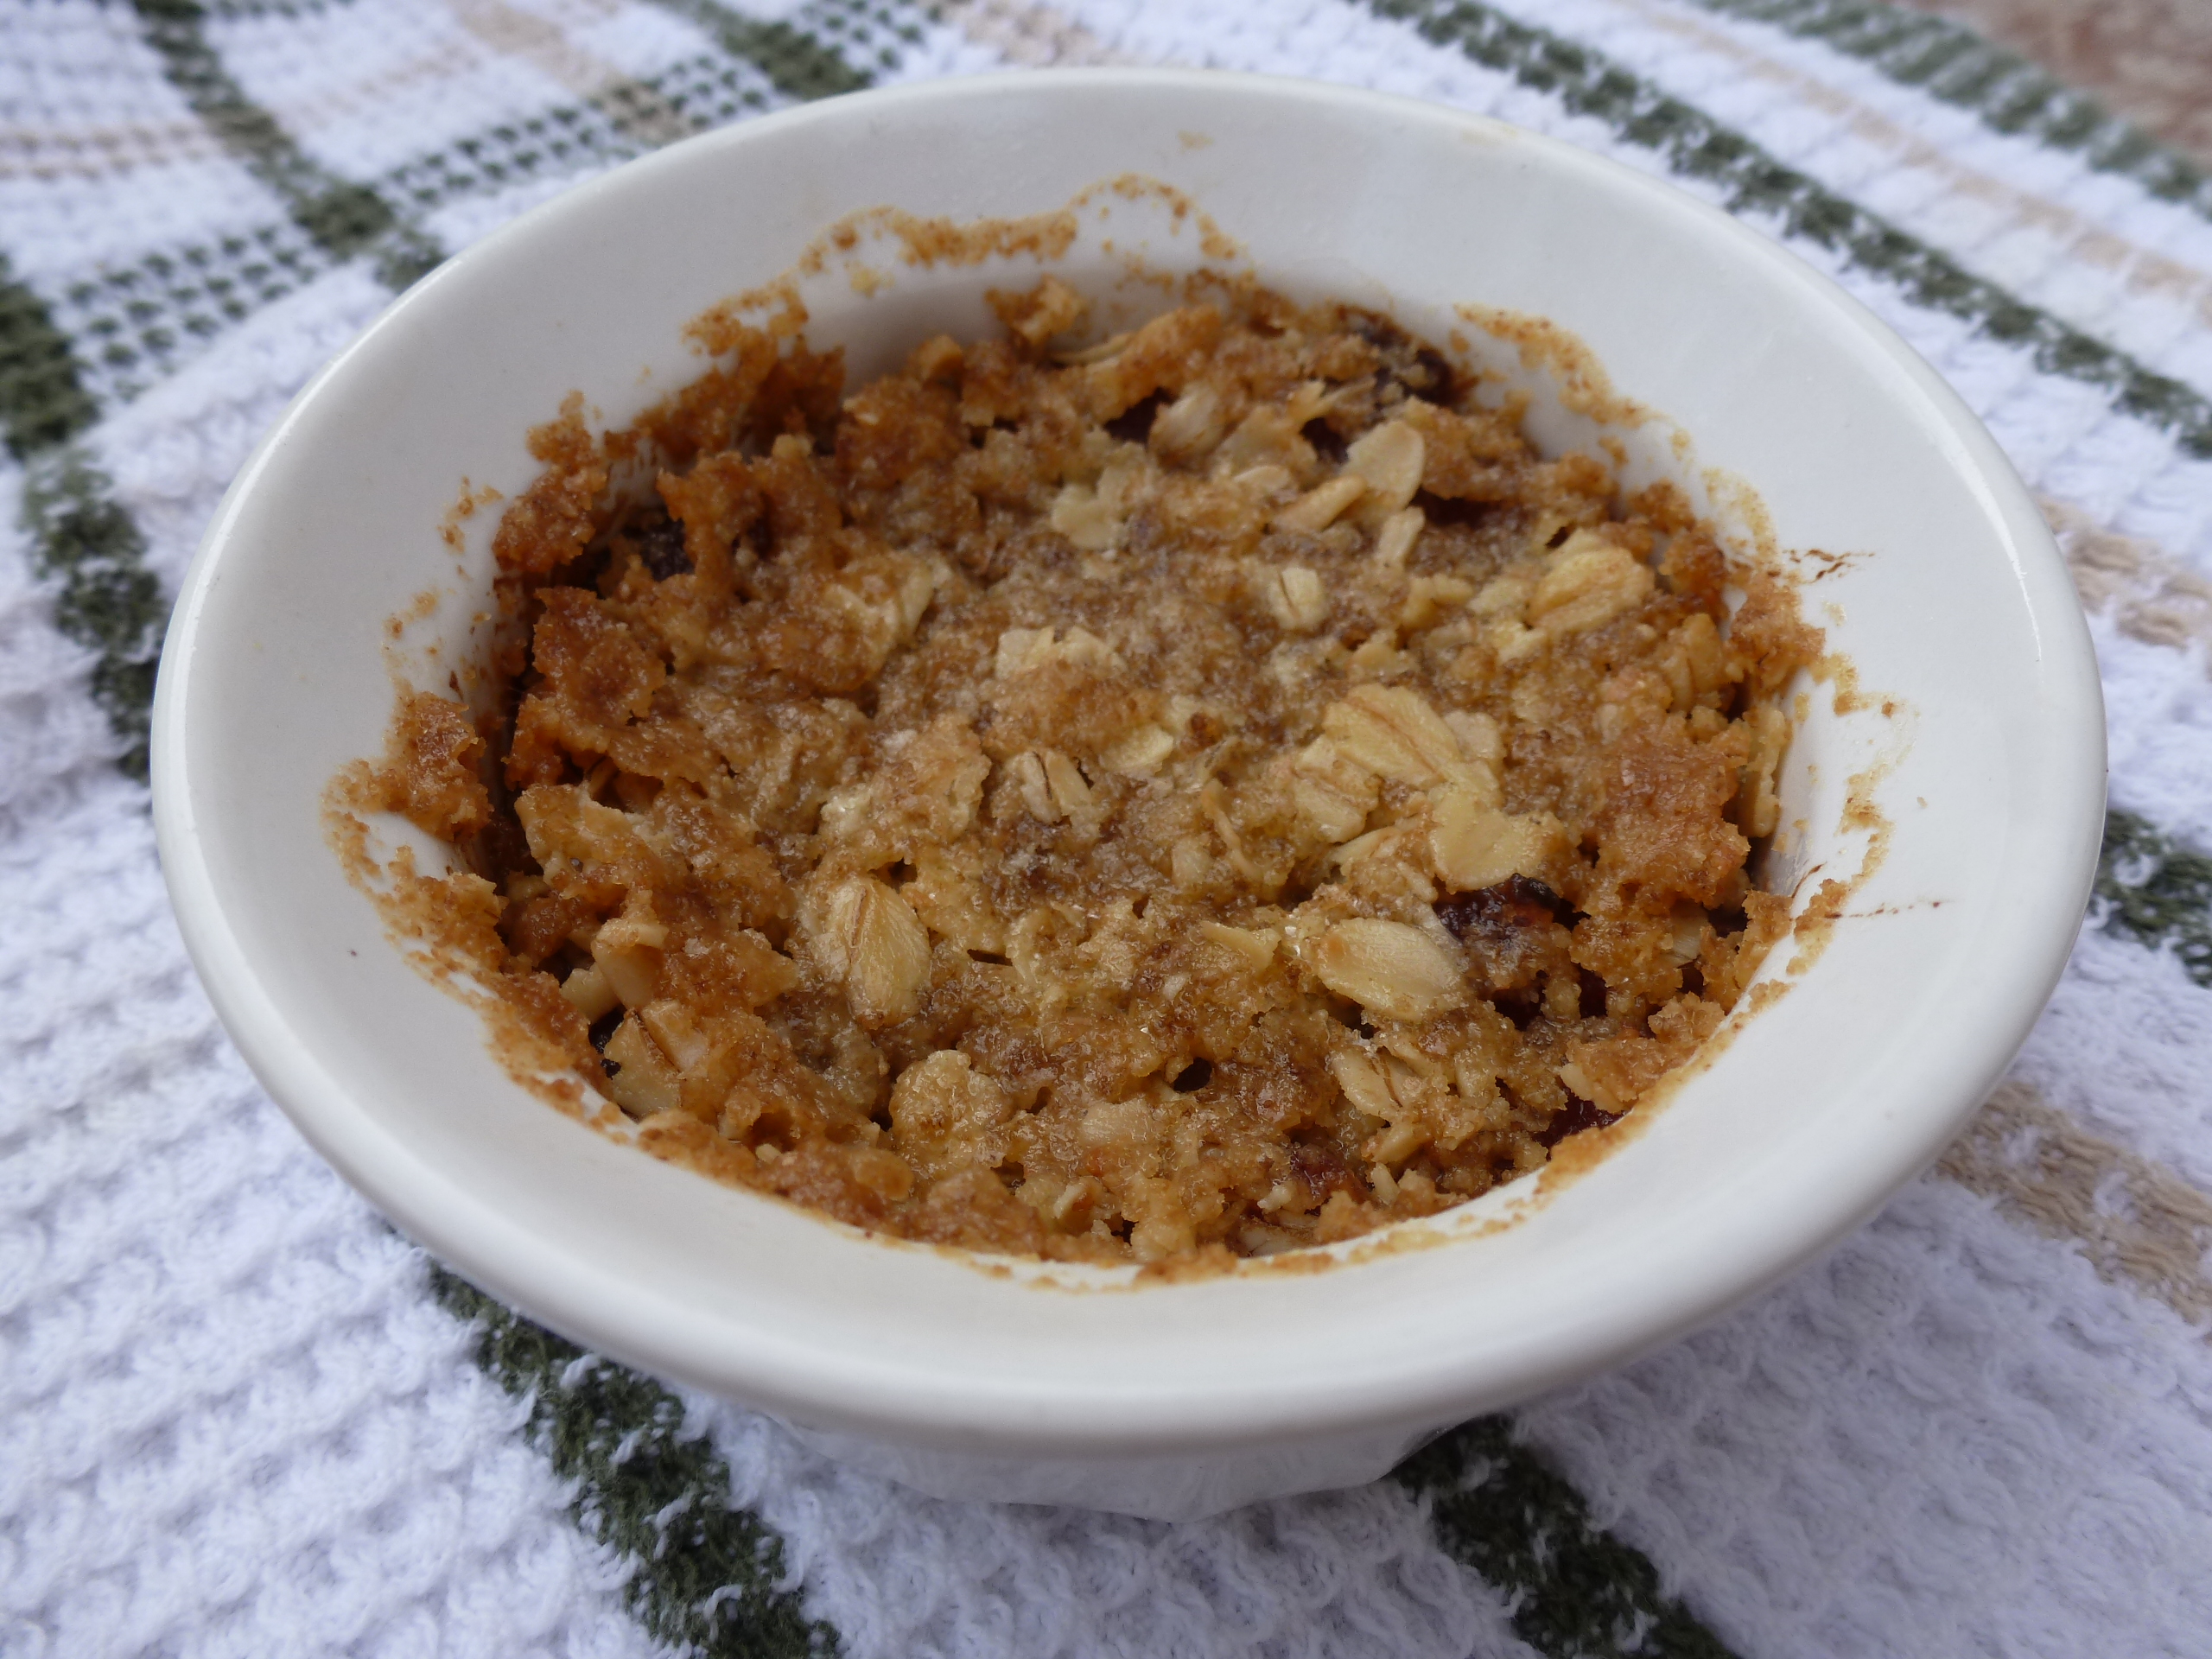 A crumble that was made with warm butter